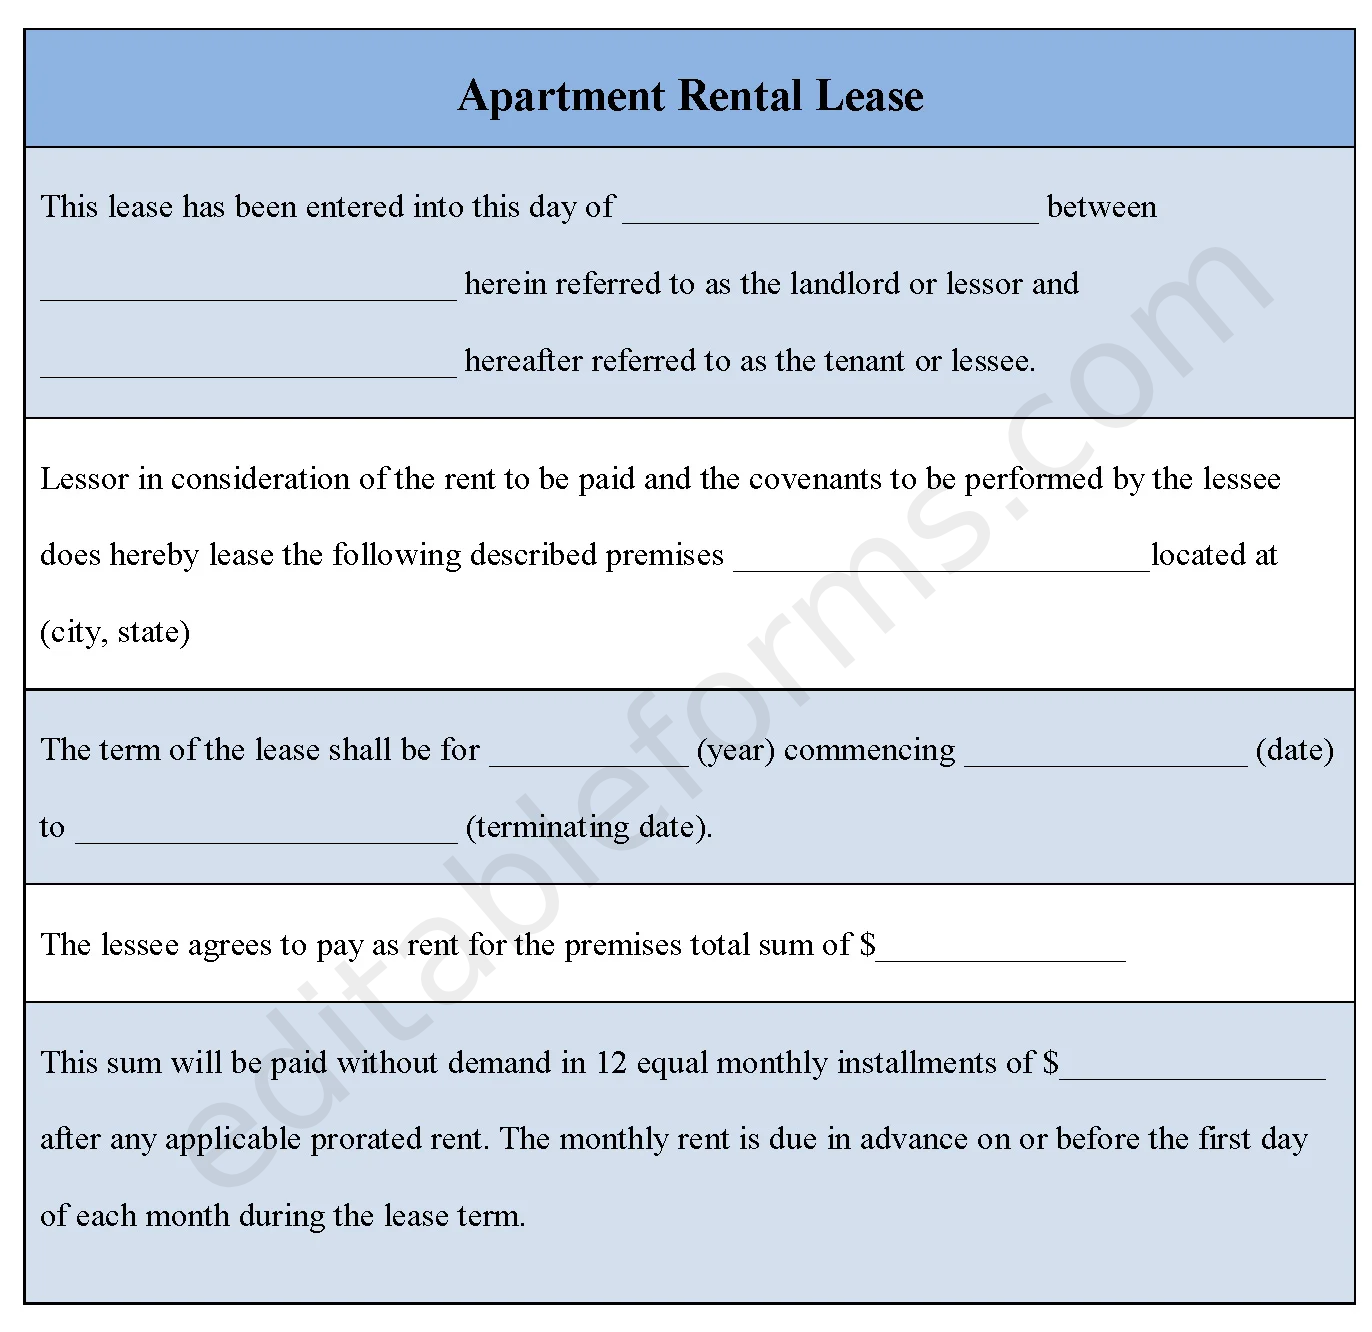 Apartment Rental Lease Fillable PDF Template